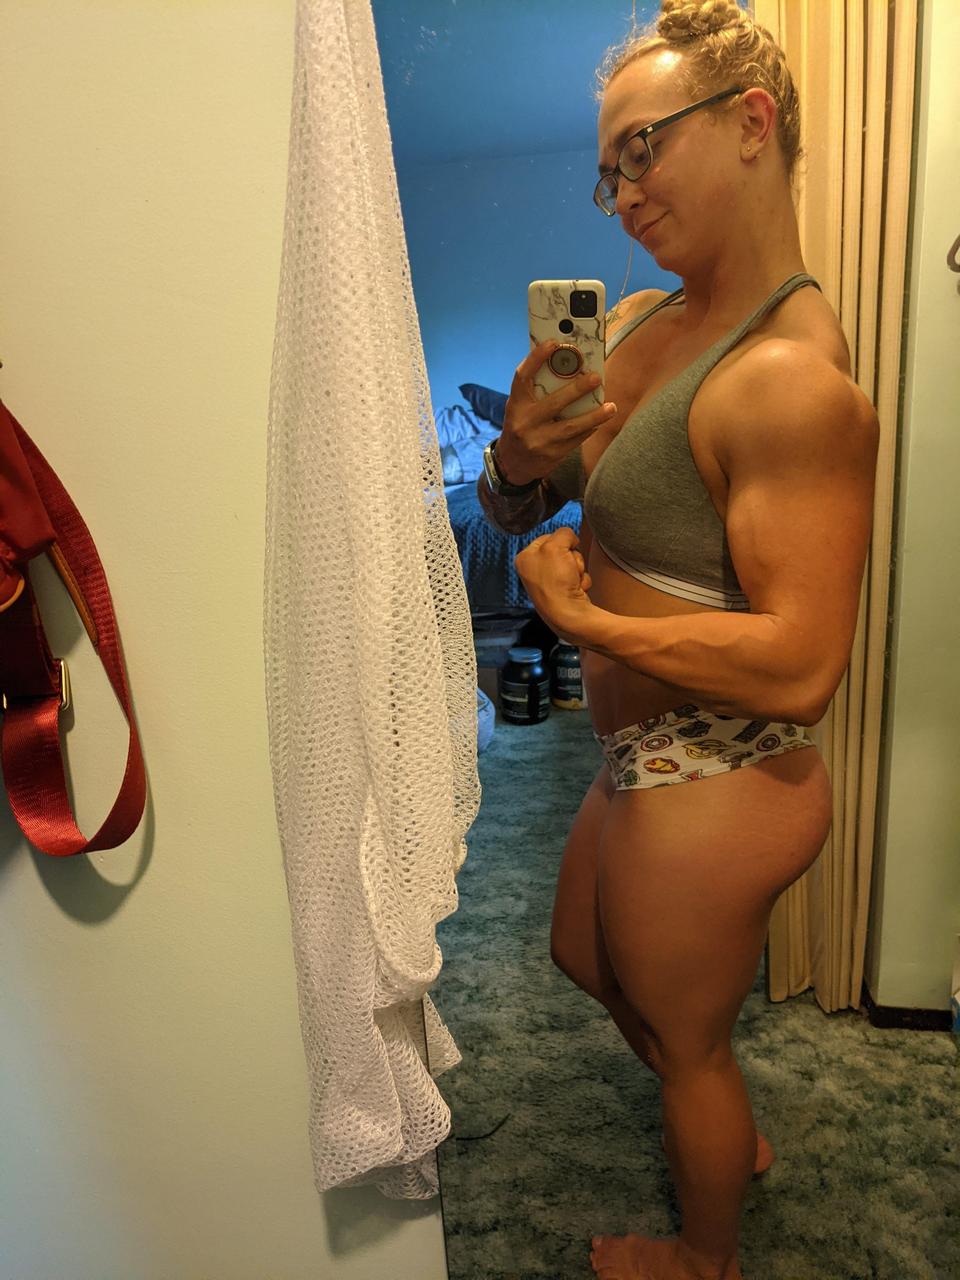 Delts Or Glutes NSFW